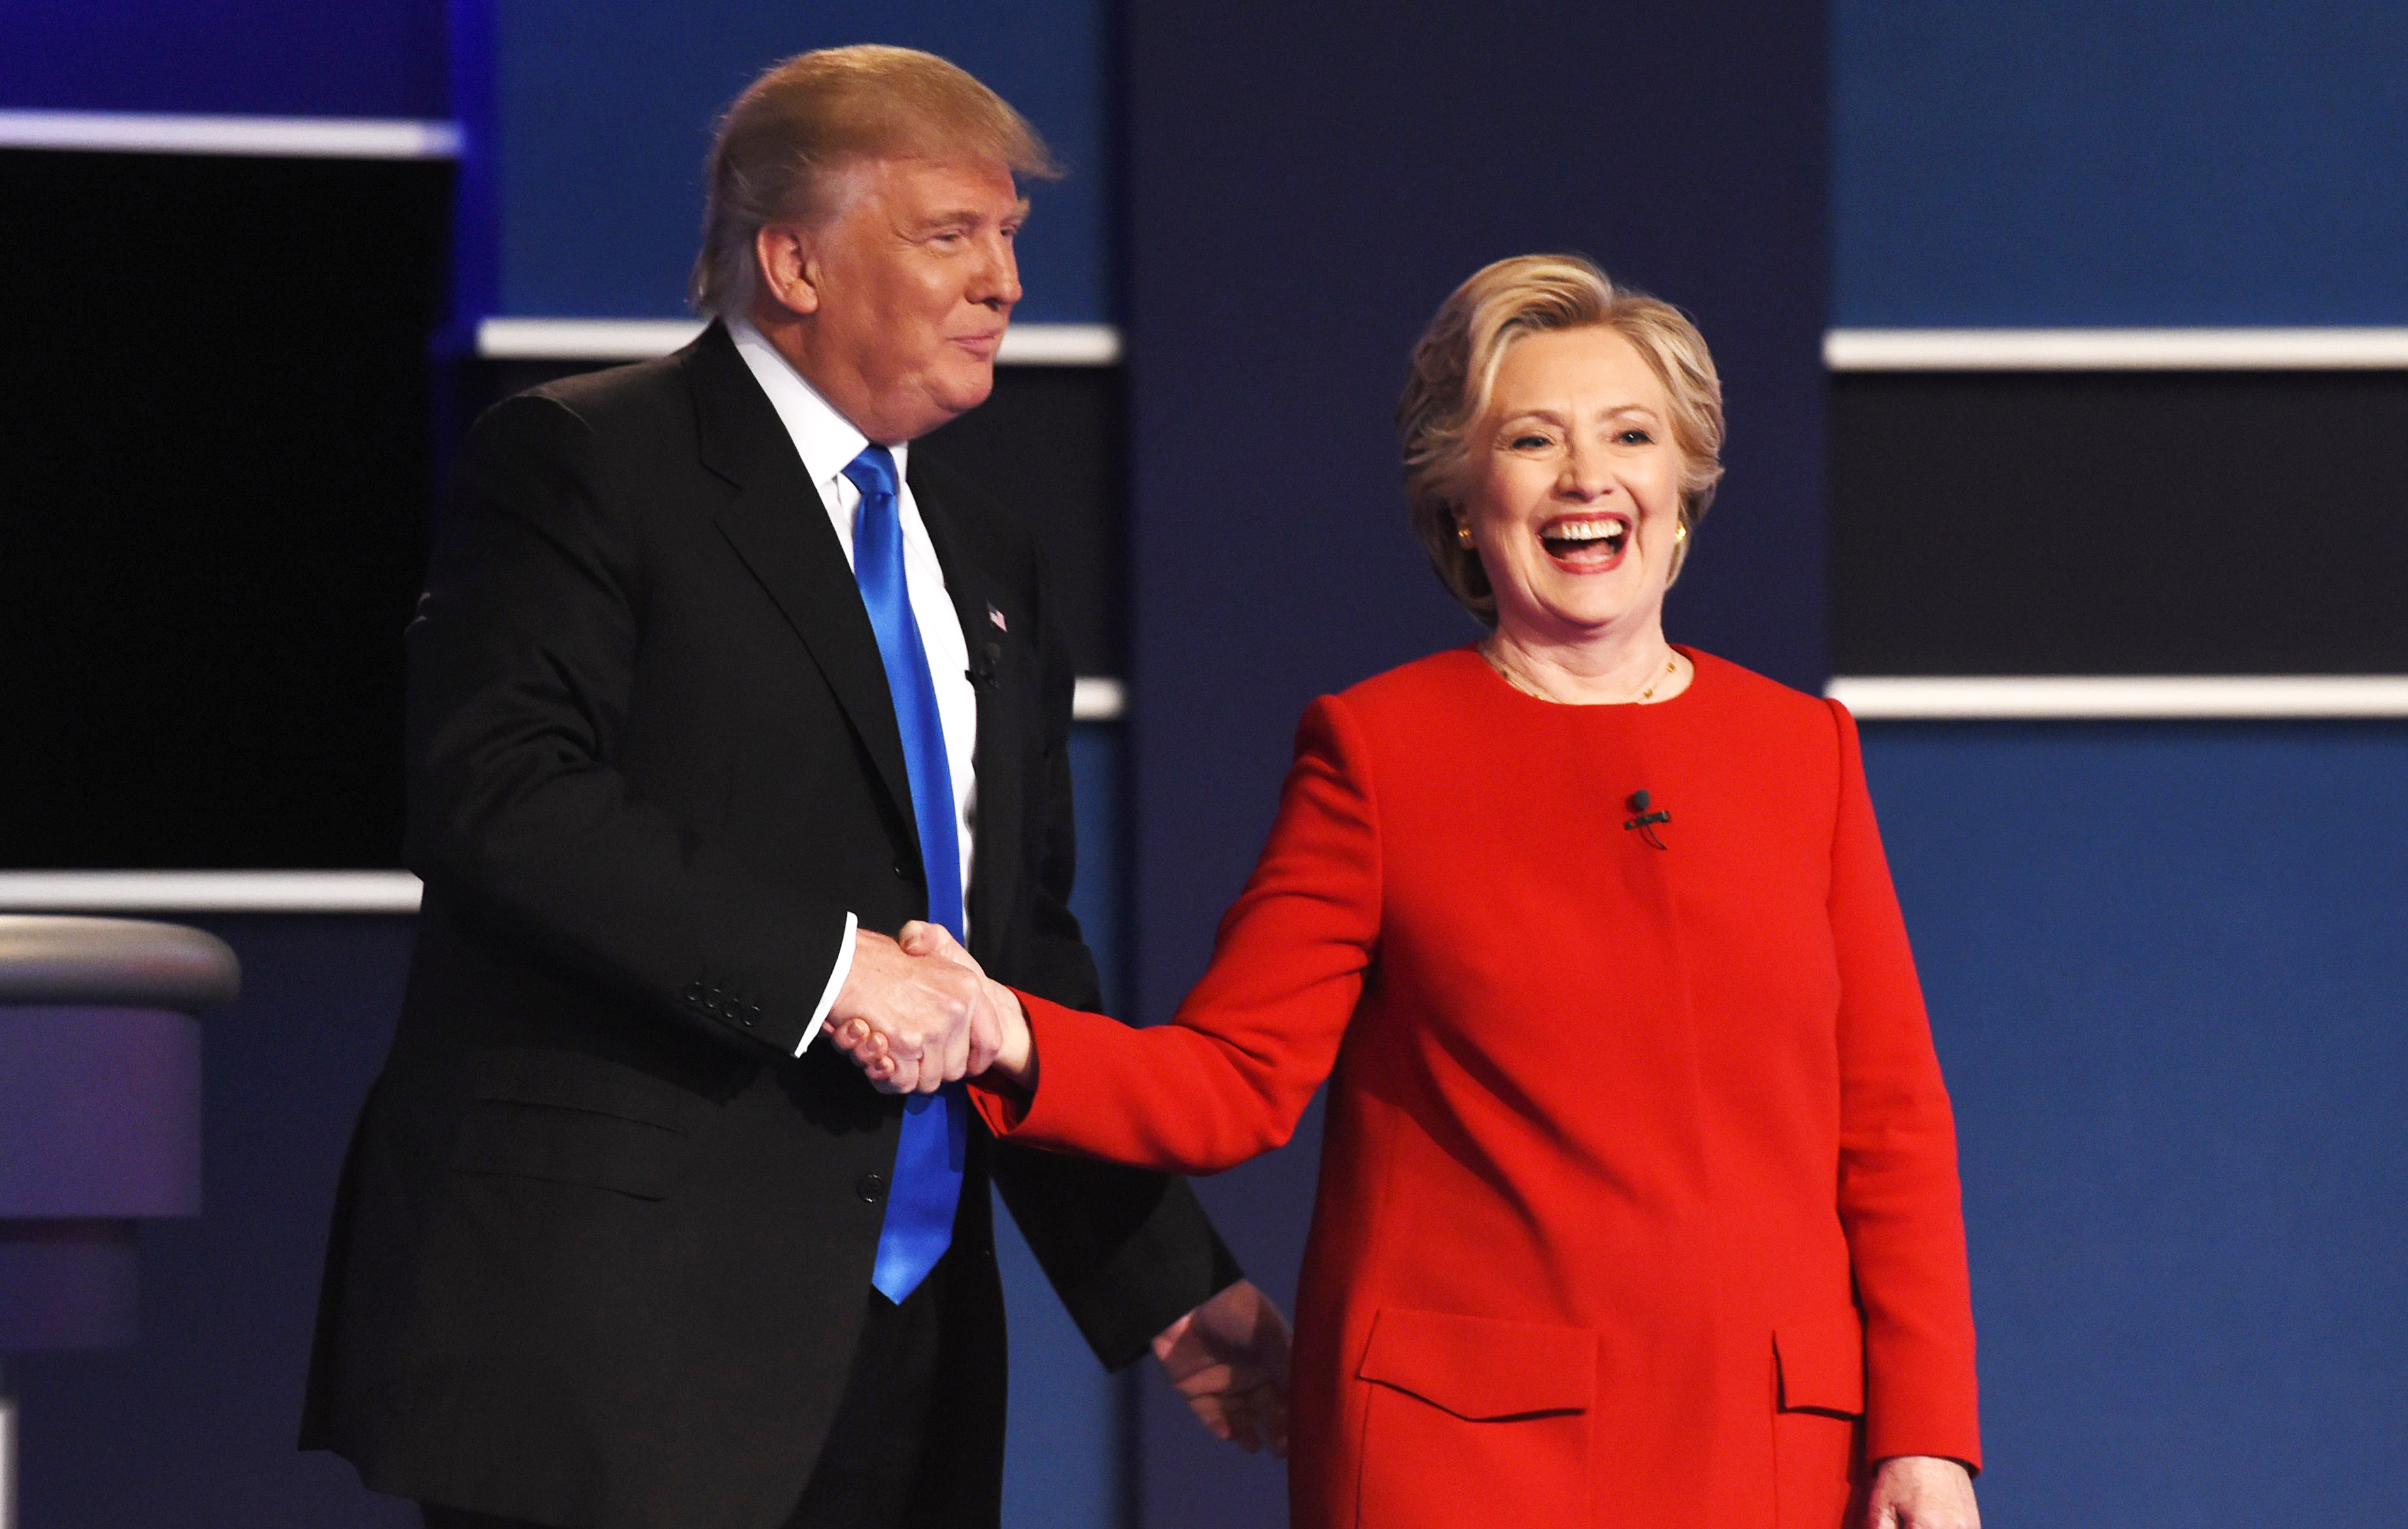 Donald Trump and Hillary Clinton after the first presidential debate at Hofstra University in Hempstead, N.Y., on Sept. 26, 2016. (Timothy A. Clary—AFP/Getty Images)